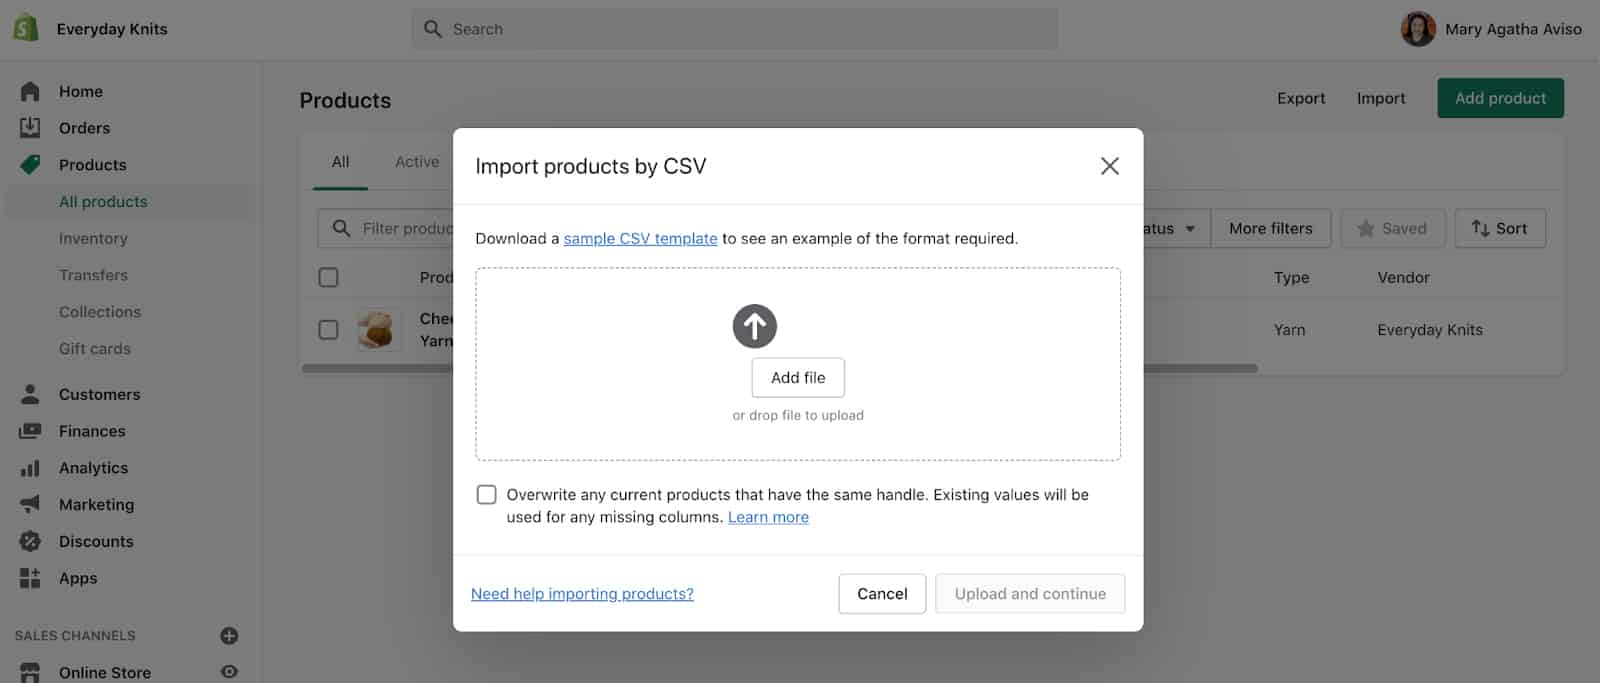 Image of Shopify importing products by CSV file.